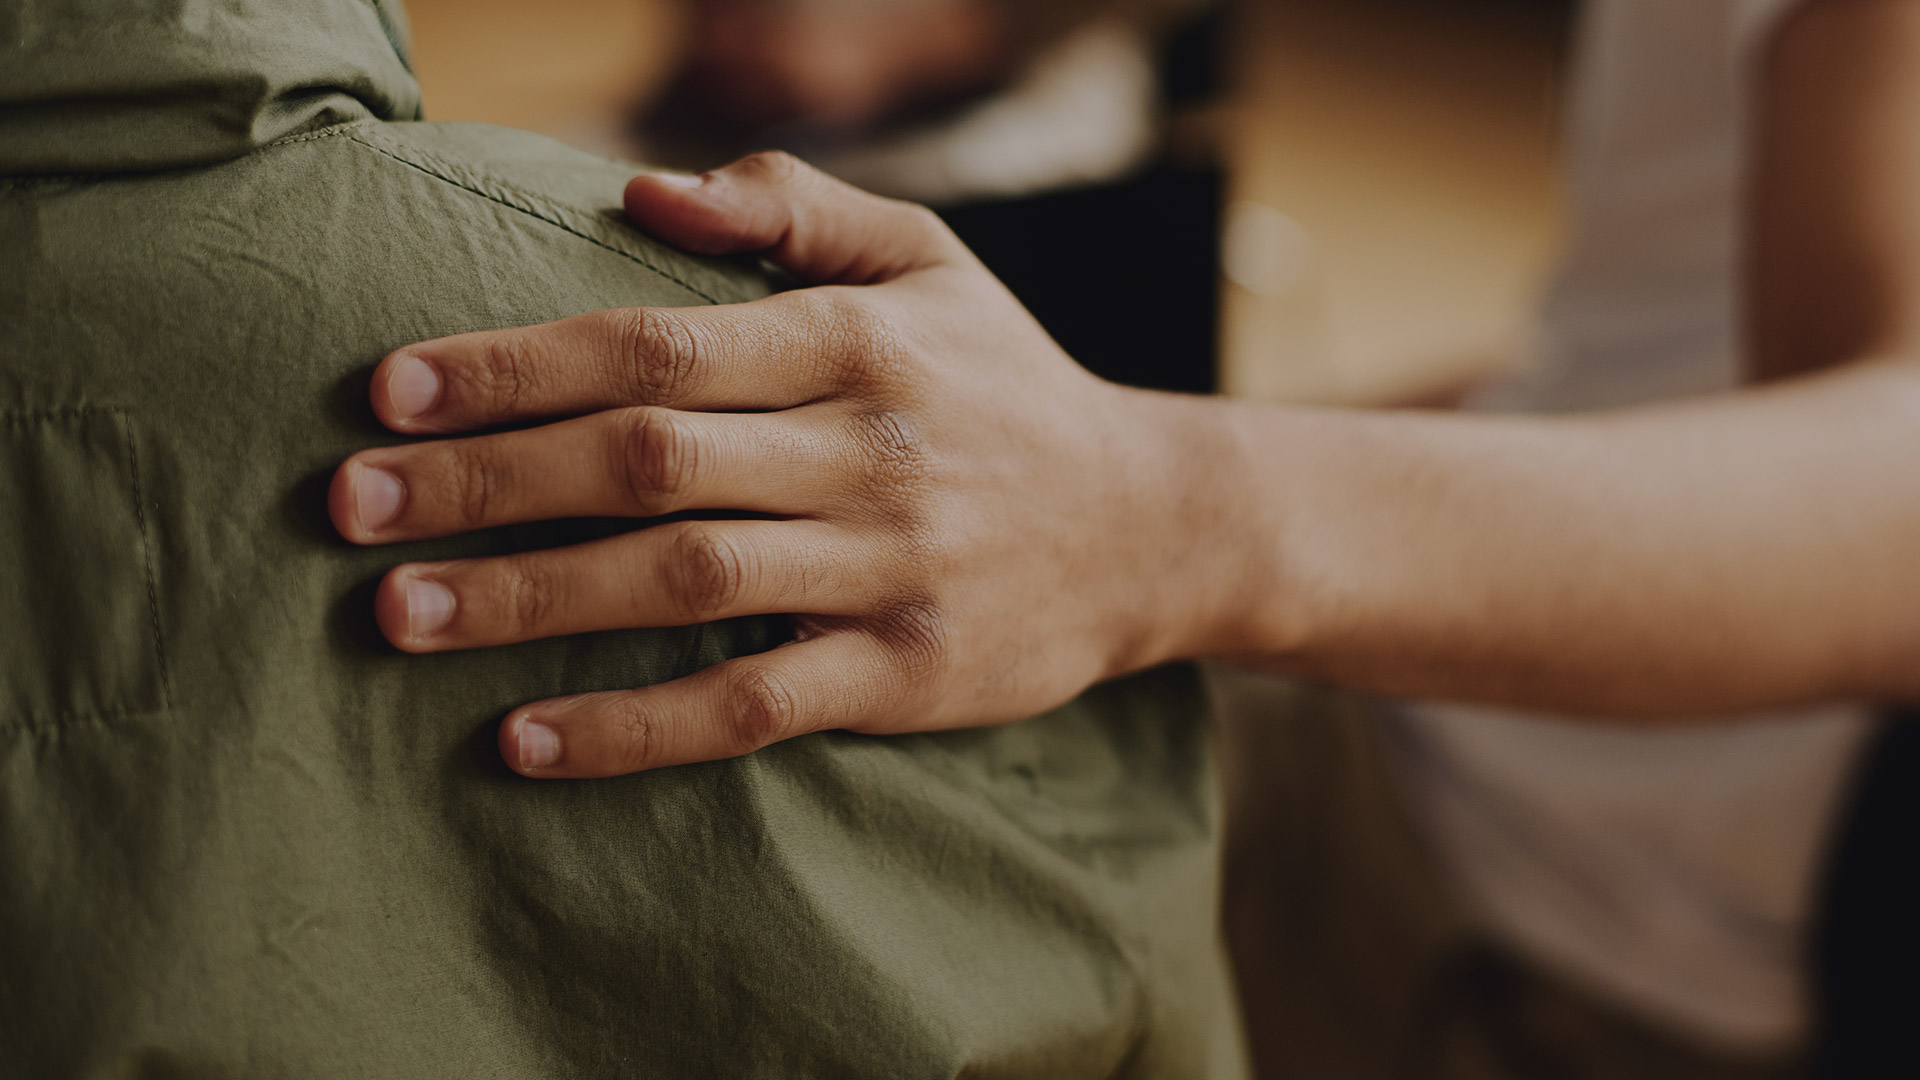 A person's hand giving a supportive touch on another individual's back